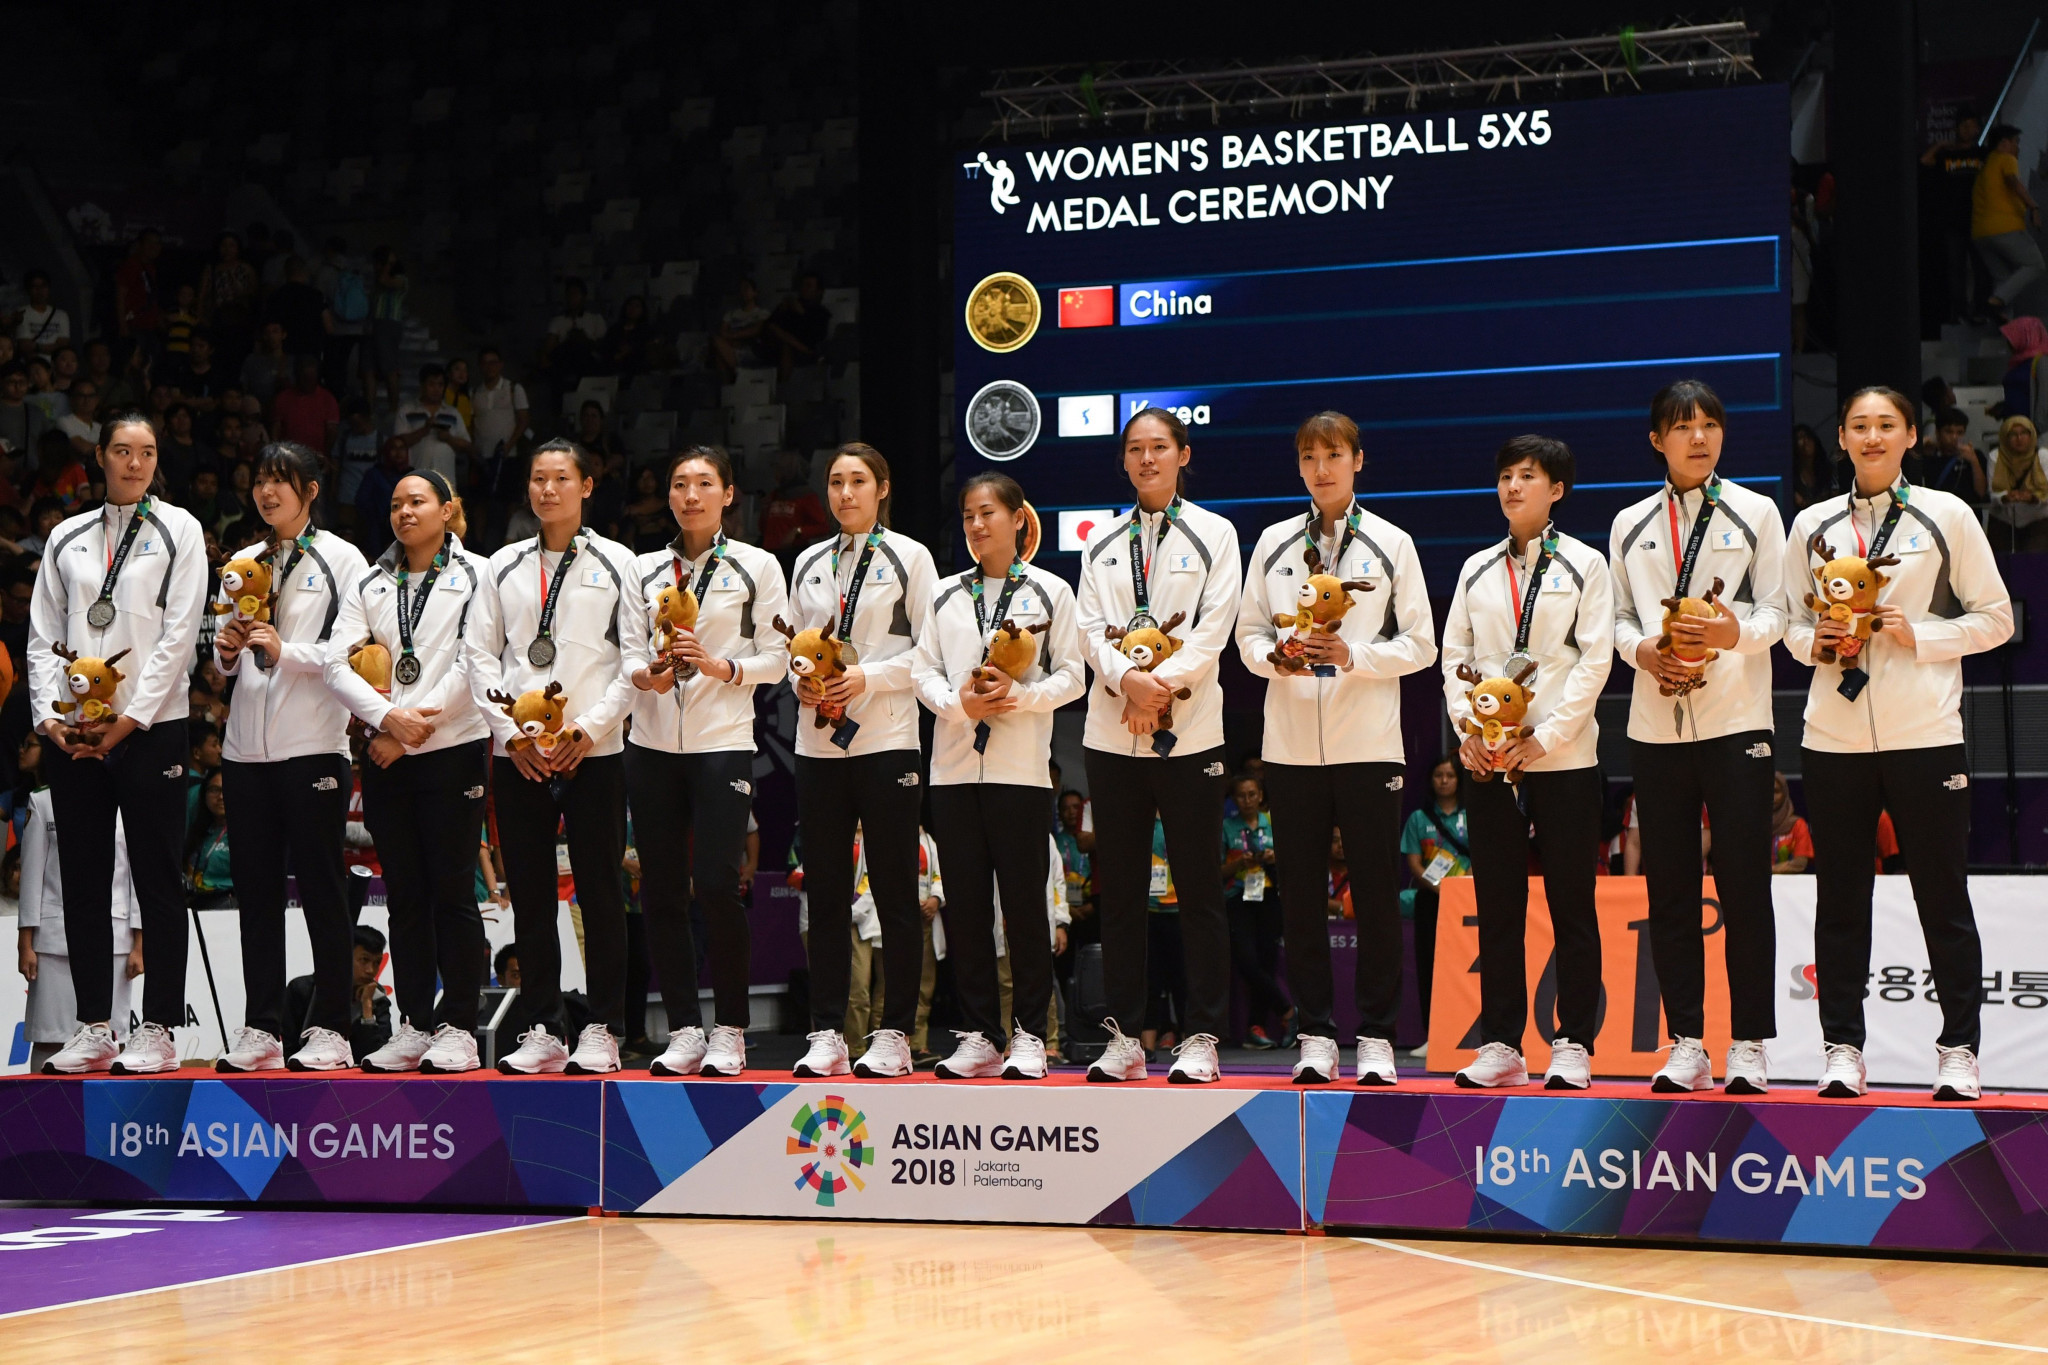 The joint Korean team won silver in the women's basketball event at the 2018 Asian Games ©Getty Images